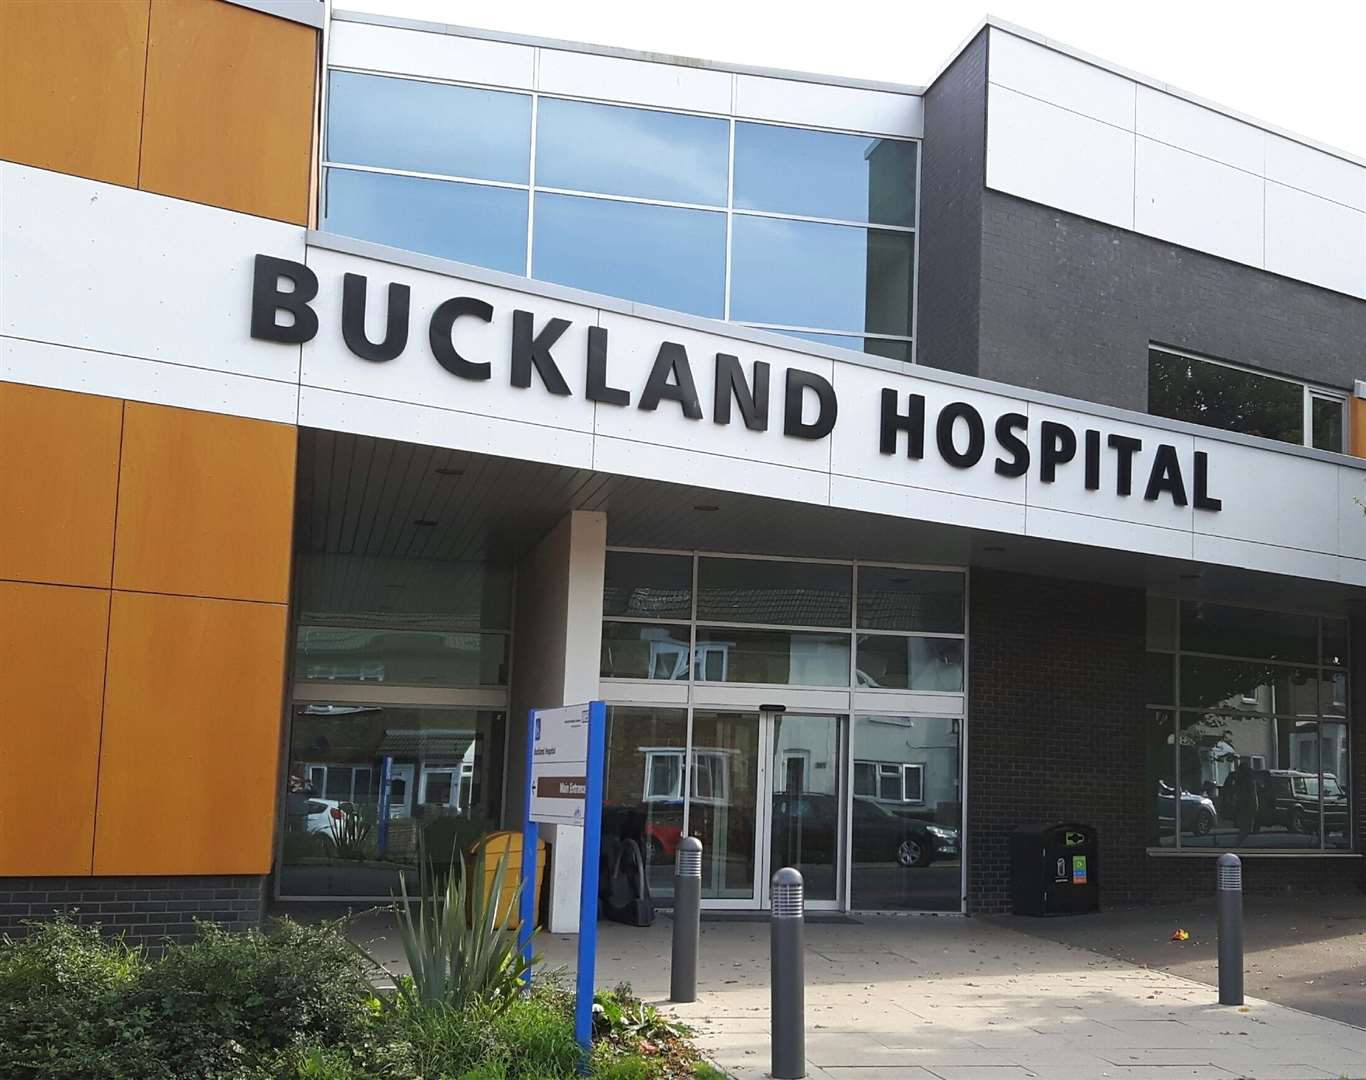 Ms Russell raised her concerns at Buckland Hospital